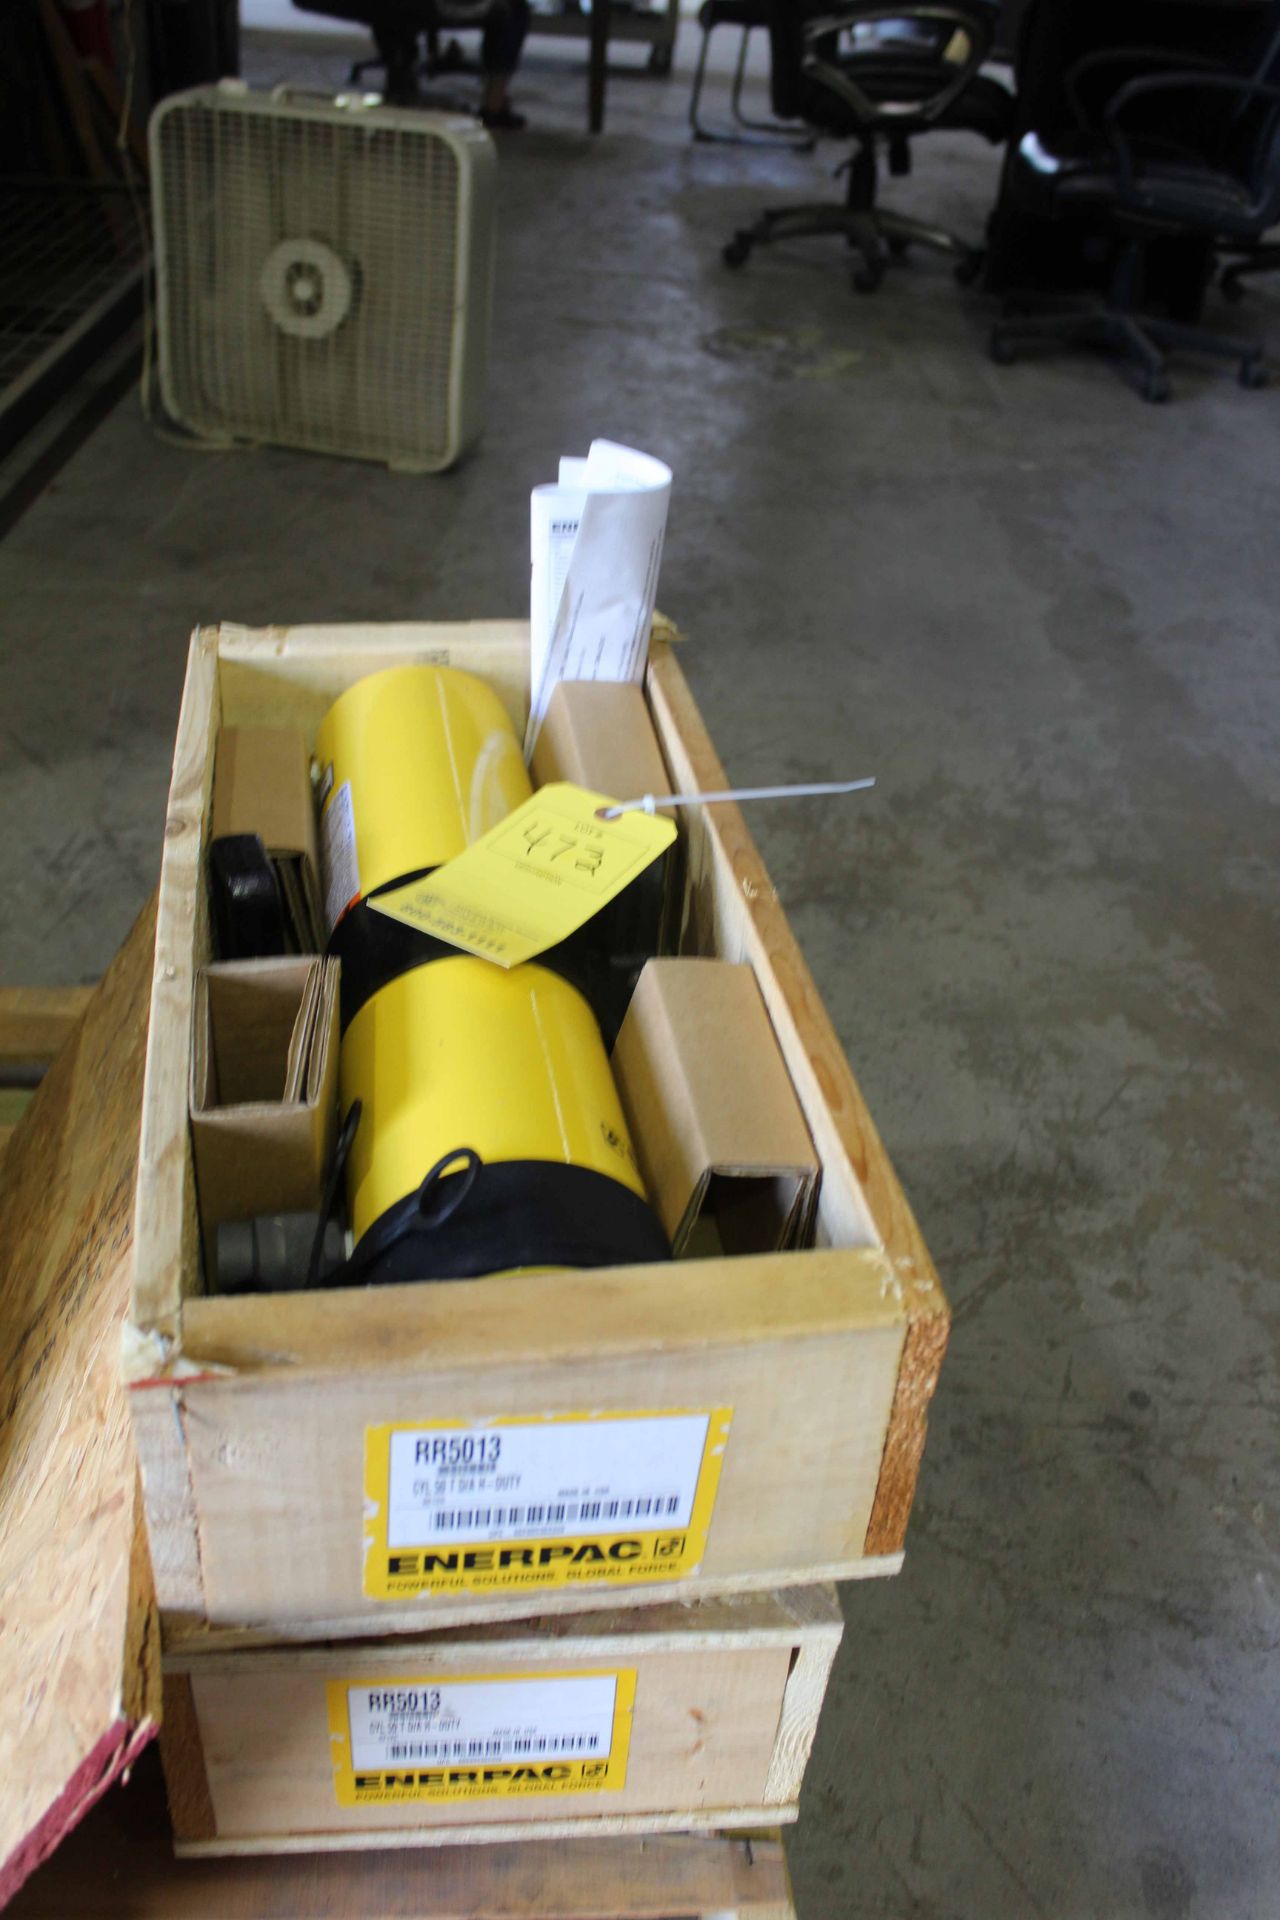 LOT OF POWER PAC CYLINDERS, ENERPAC MDL. RR5013, 50 T.H.C. (new)